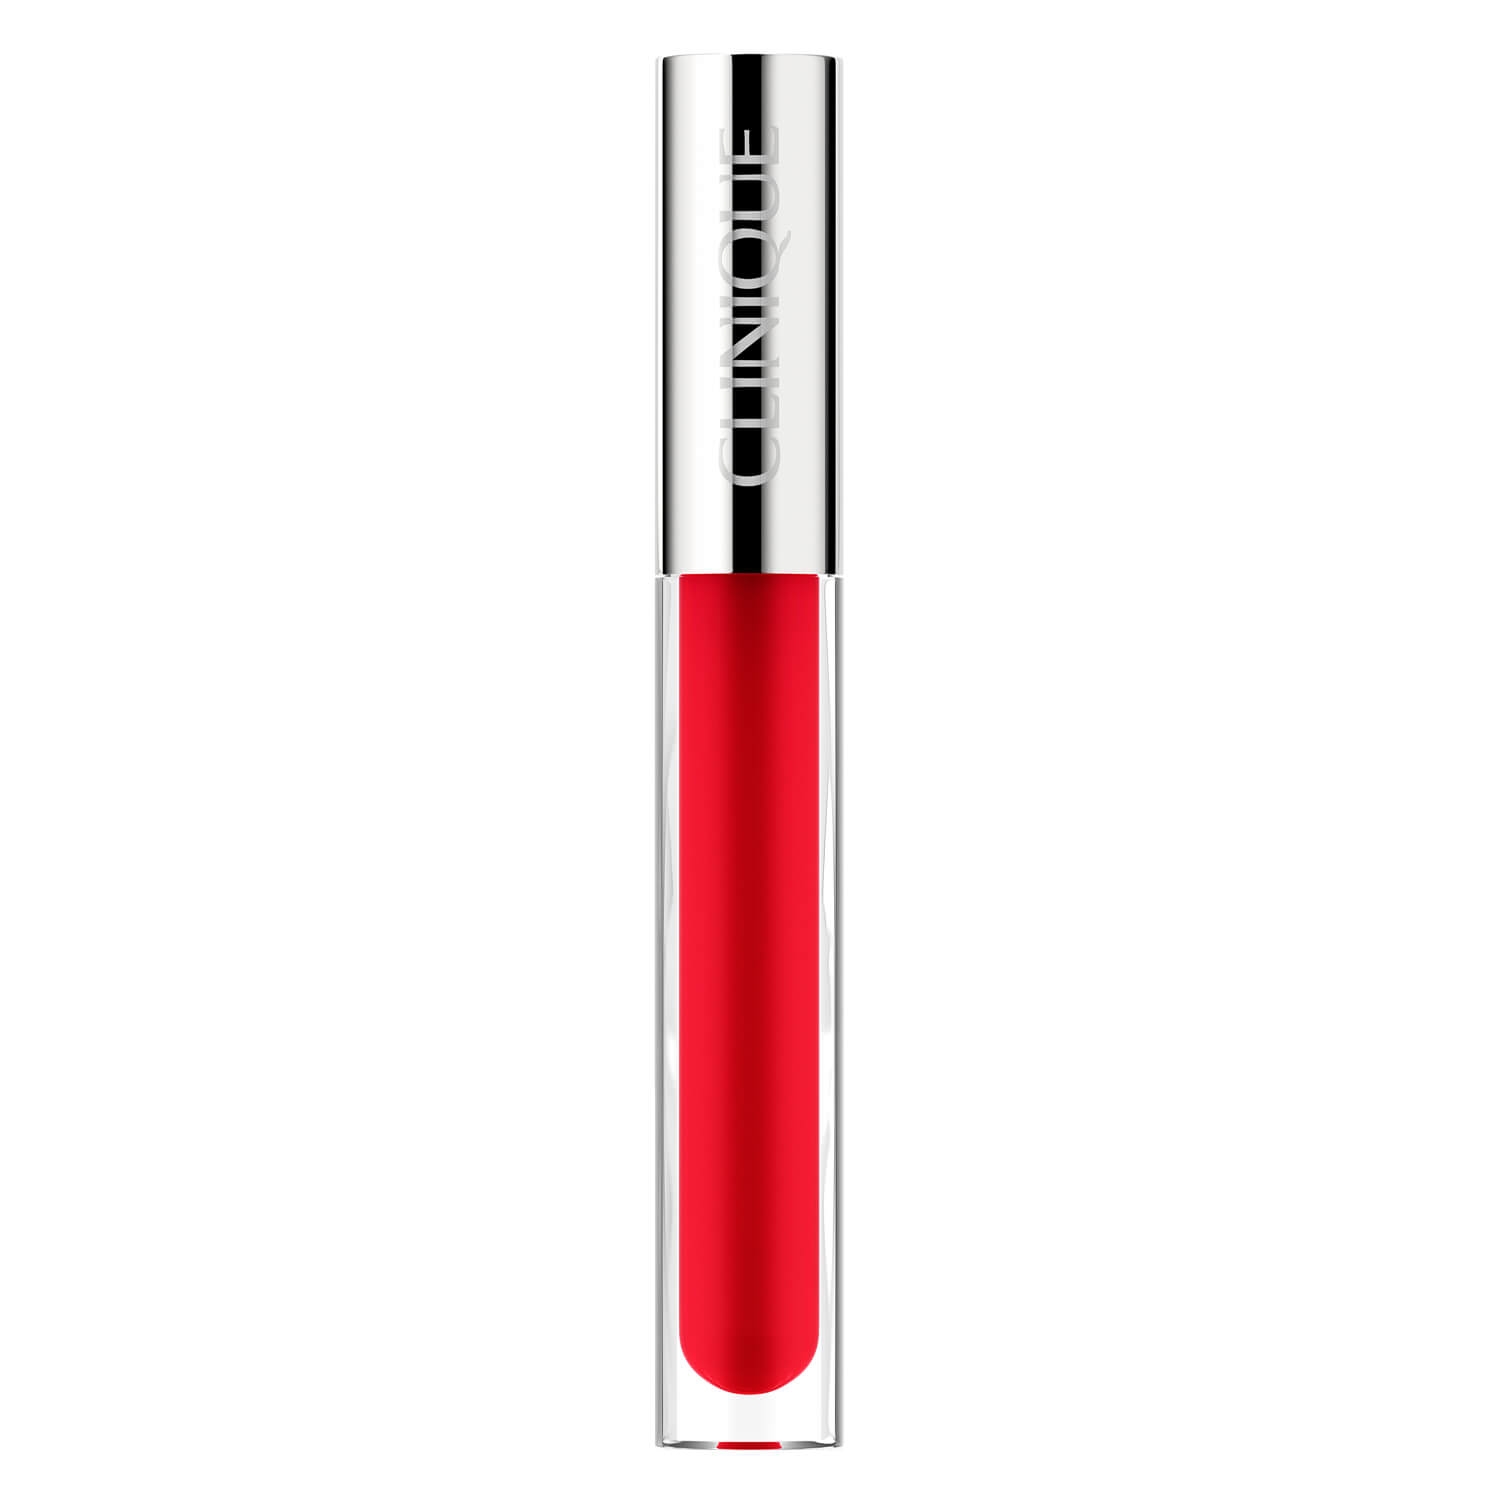 Product image from Clinique Lips - Pop Plush Creamy Lip Gloss 04 Juicy Apple Pop